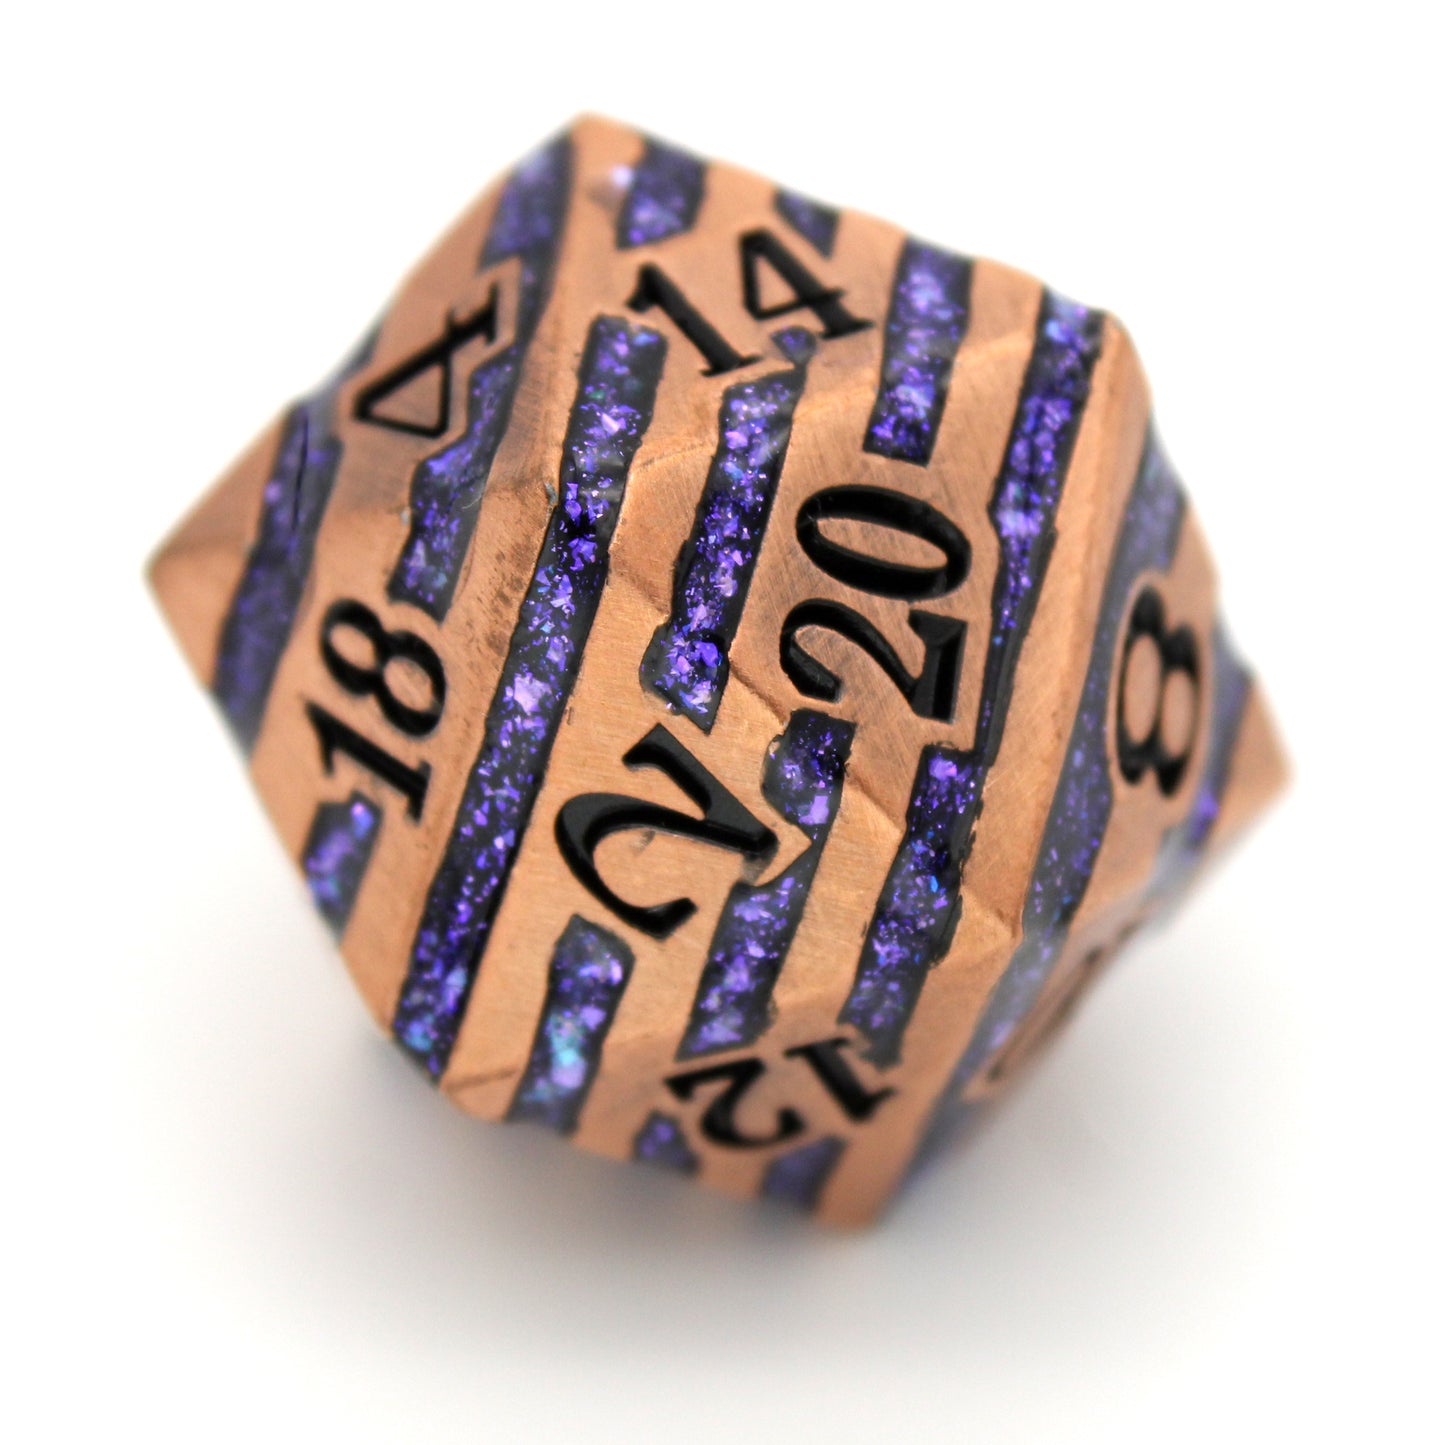  Apothecary is a 7-piece brushed copper metal set banded in a wraparound enamel fill of shimmering purple. It is part of the Steampunk collection, sister to our Cyberpunk collection.